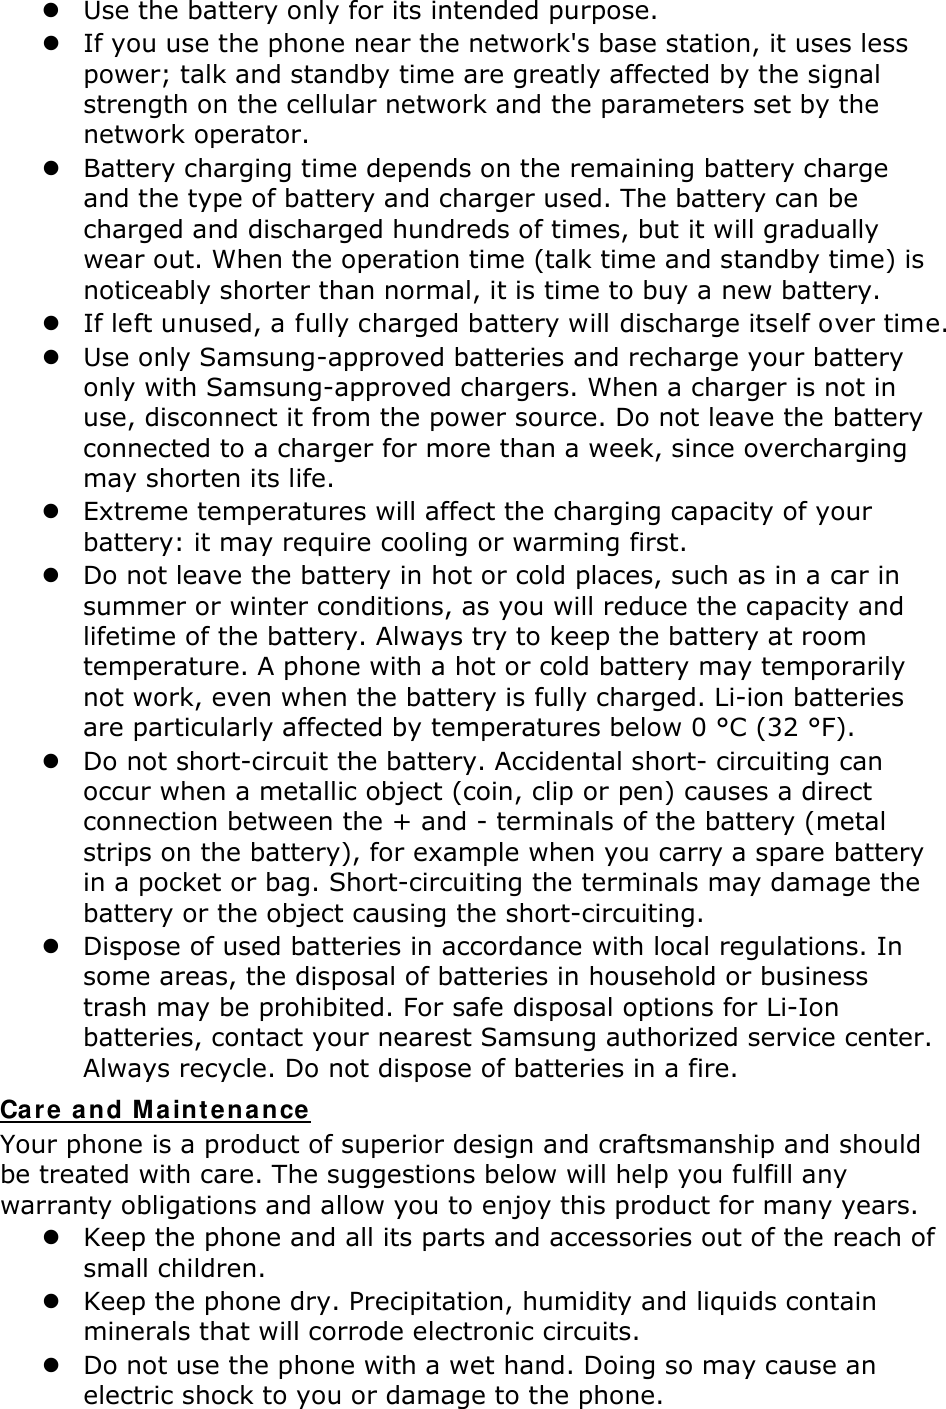  Use the battery only for its intended purpose.  If you use the phone near the network&apos;s base station, it uses less power; talk and standby time are greatly affected by the signal strength on the cellular network and the parameters set by the network operator.  Battery charging time depends on the remaining battery charge and the type of battery and charger used. The battery can be charged and discharged hundreds of times, but it will gradually wear out. When the operation time (talk time and standby time) is noticeably shorter than normal, it is time to buy a new battery.  If left unused, a fully charged battery will discharge itself over time.  Use only Samsung-approved batteries and recharge your battery only with Samsung-approved chargers. When a charger is not in use, disconnect it from the power source. Do not leave the battery connected to a charger for more than a week, since overcharging may shorten its life.  Extreme temperatures will affect the charging capacity of your battery: it may require cooling or warming first.  Do not leave the battery in hot or cold places, such as in a car in summer or winter conditions, as you will reduce the capacity and lifetime of the battery. Always try to keep the battery at room temperature. A phone with a hot or cold battery may temporarily not work, even when the battery is fully charged. Li-ion batteries are particularly affected by temperatures below 0 °C (32 °F).  Do not short-circuit the battery. Accidental short- circuiting can occur when a metallic object (coin, clip or pen) causes a direct connection between the + and - terminals of the battery (metal strips on the battery), for example when you carry a spare battery in a pocket or bag. Short-circuiting the terminals may damage the battery or the object causing the short-circuiting.  Dispose of used batteries in accordance with local regulations. In some areas, the disposal of batteries in household or business trash may be prohibited. For safe disposal options for Li-Ion batteries, contact your nearest Samsung authorized service center. Always recycle. Do not dispose of batteries in a fire. Care and Maintenance Your phone is a product of superior design and craftsmanship and should be treated with care. The suggestions below will help you fulfill any warranty obligations and allow you to enjoy this product for many years.  Keep the phone and all its parts and accessories out of the reach of small children.  Keep the phone dry. Precipitation, humidity and liquids contain minerals that will corrode electronic circuits.  Do not use the phone with a wet hand. Doing so may cause an electric shock to you or damage to the phone. 